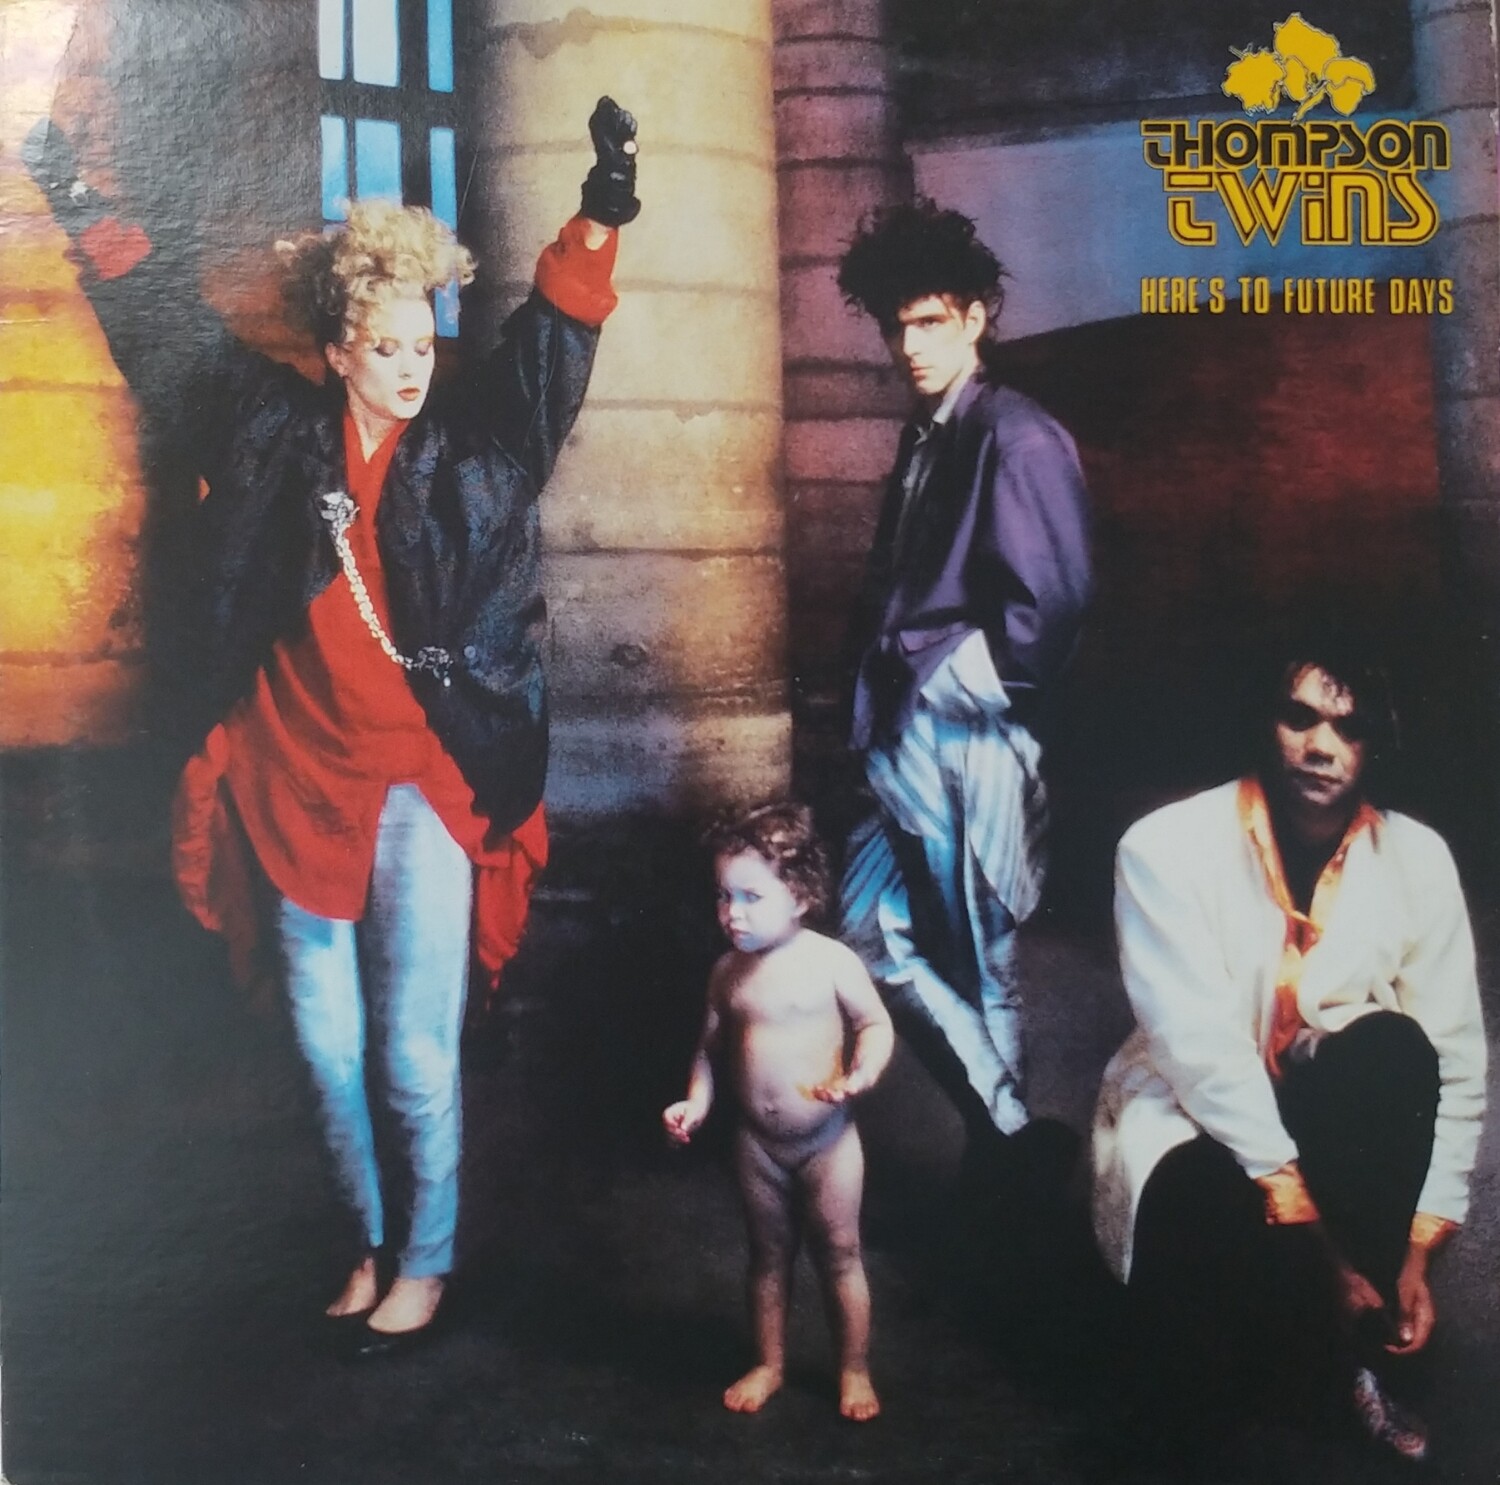 Thompson Twins - Here's to future days